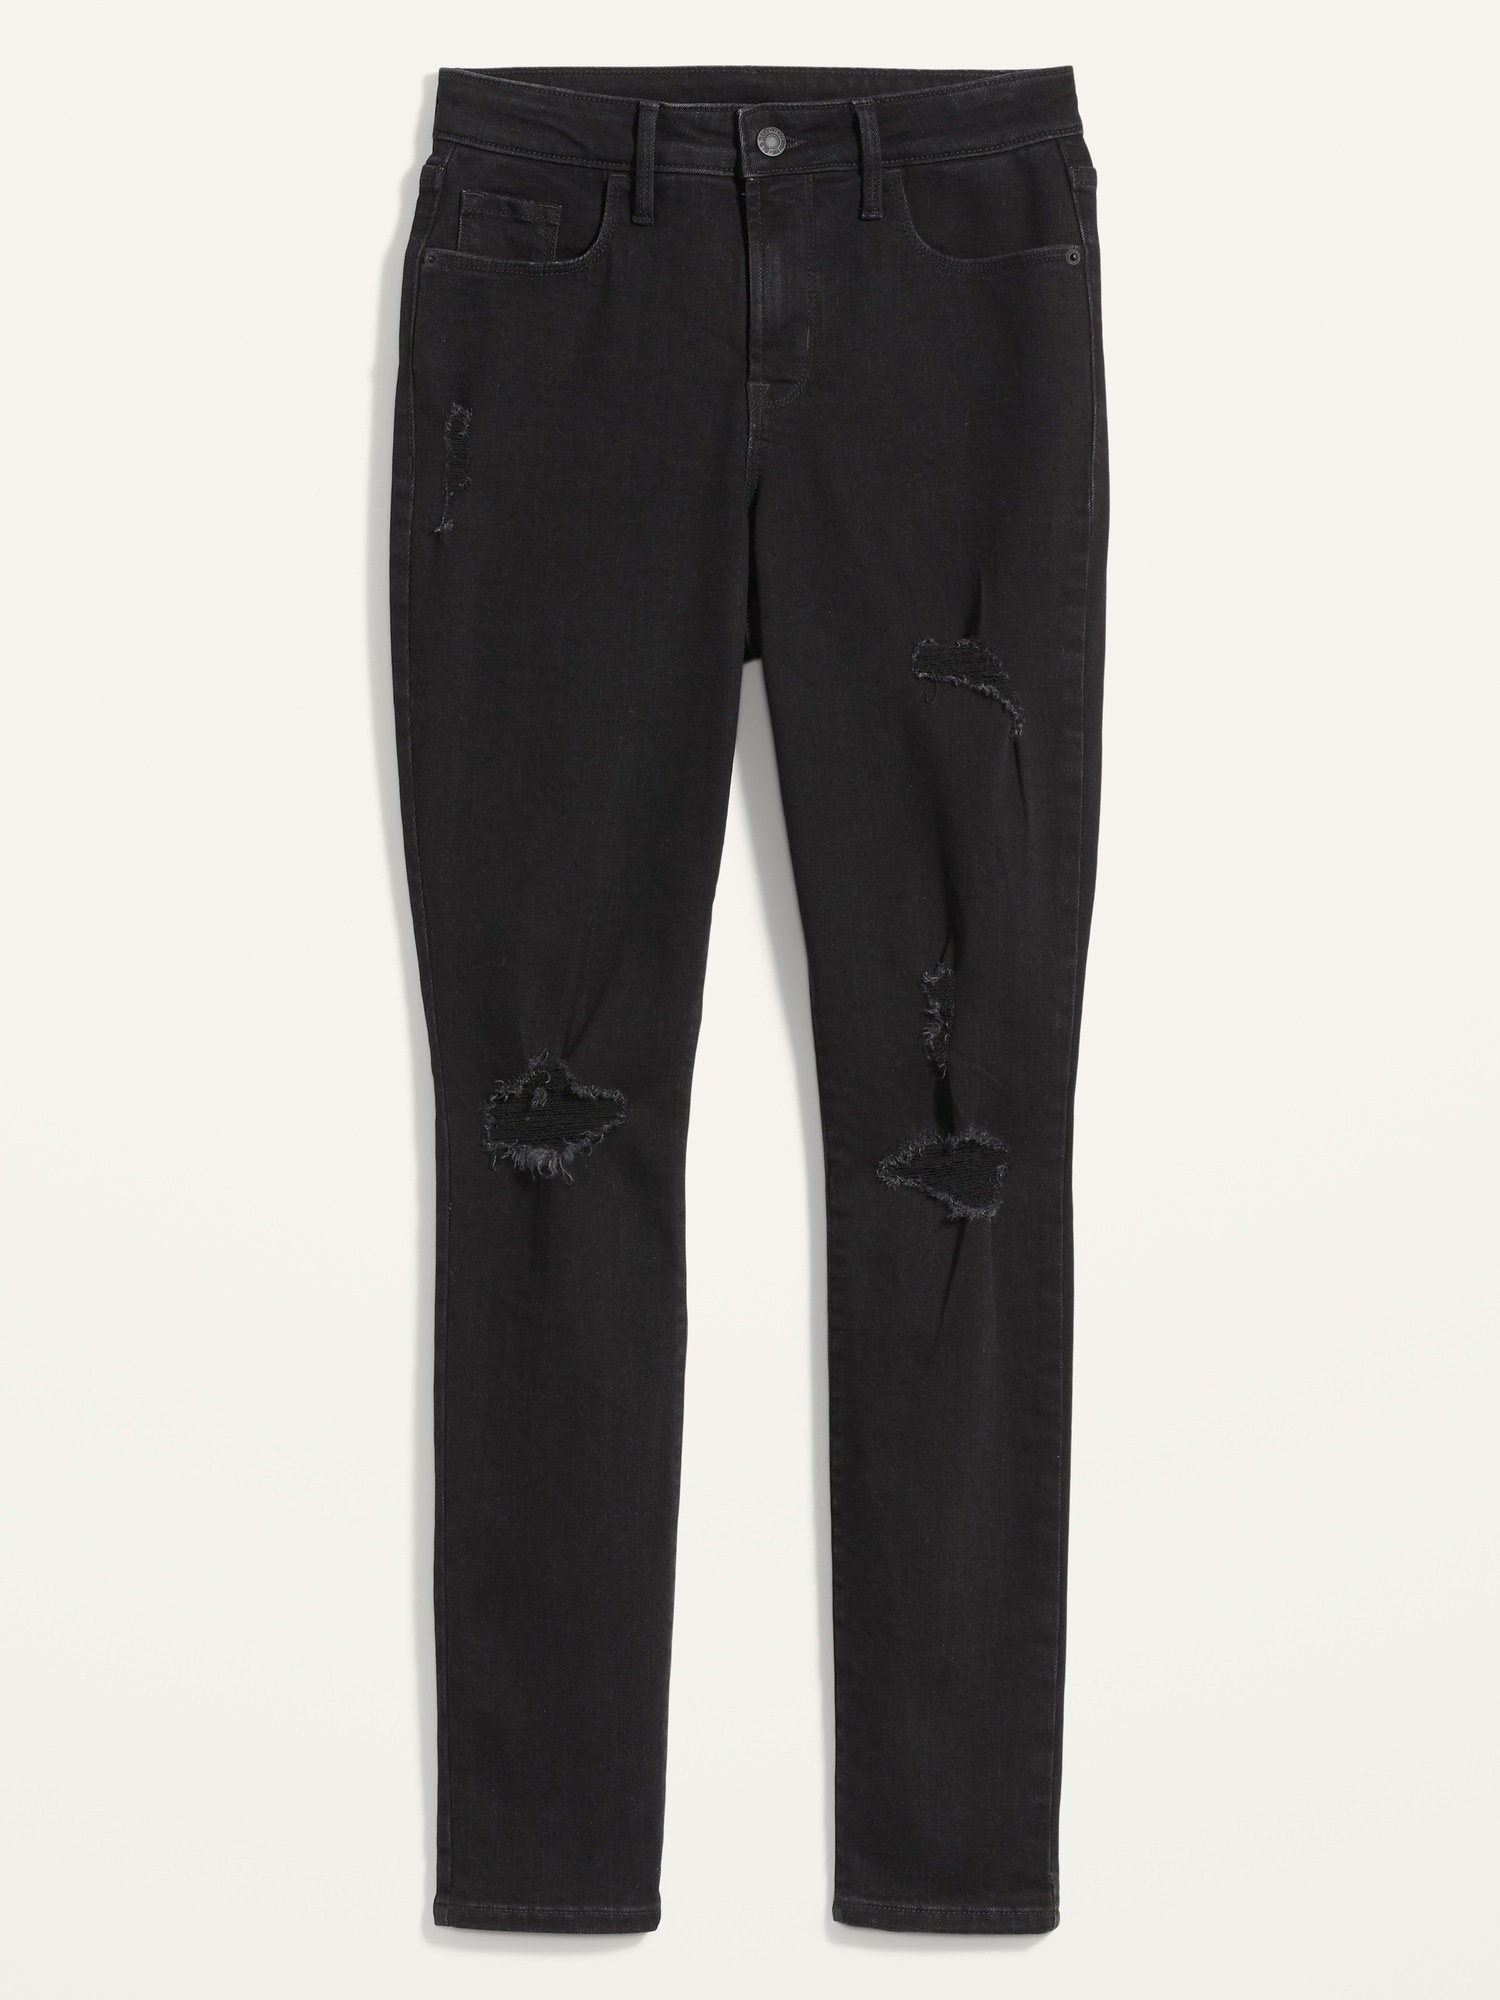 High-Waisted Pop Icon Black Ripped Skinny Jeans for Women